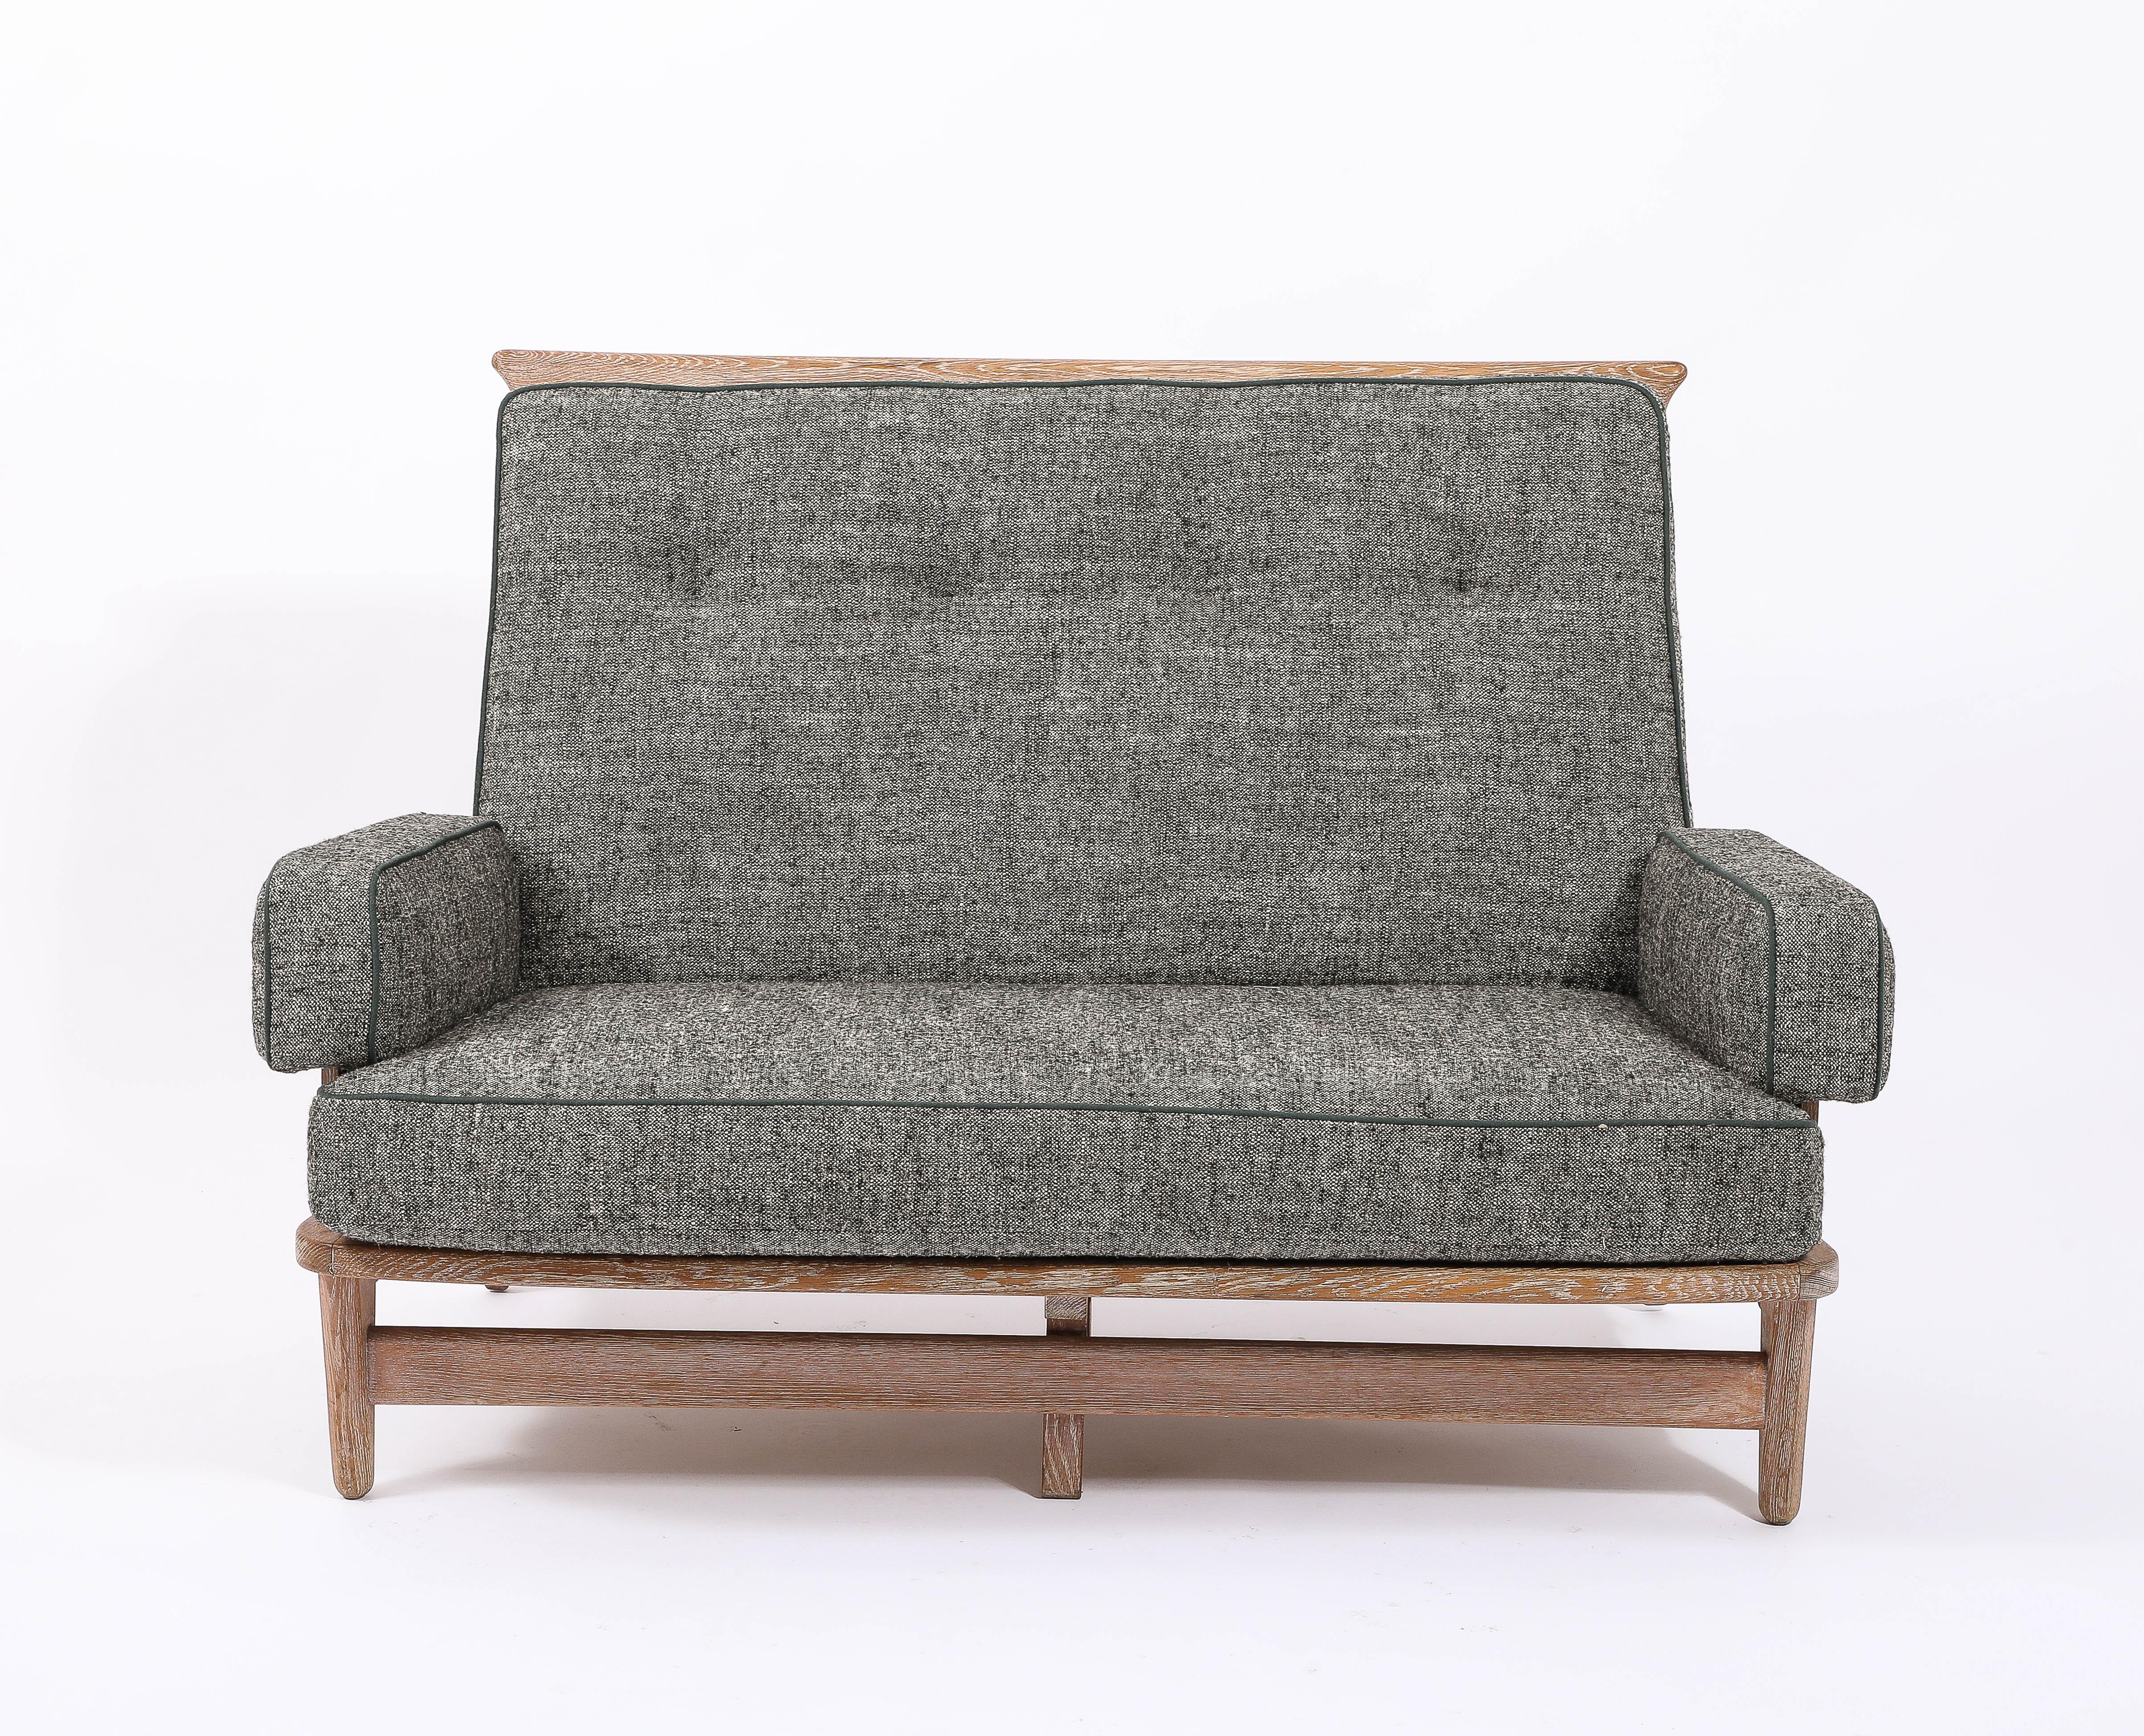 Guillerme & Chambron Settees in Oak, France 1960's For Sale 3